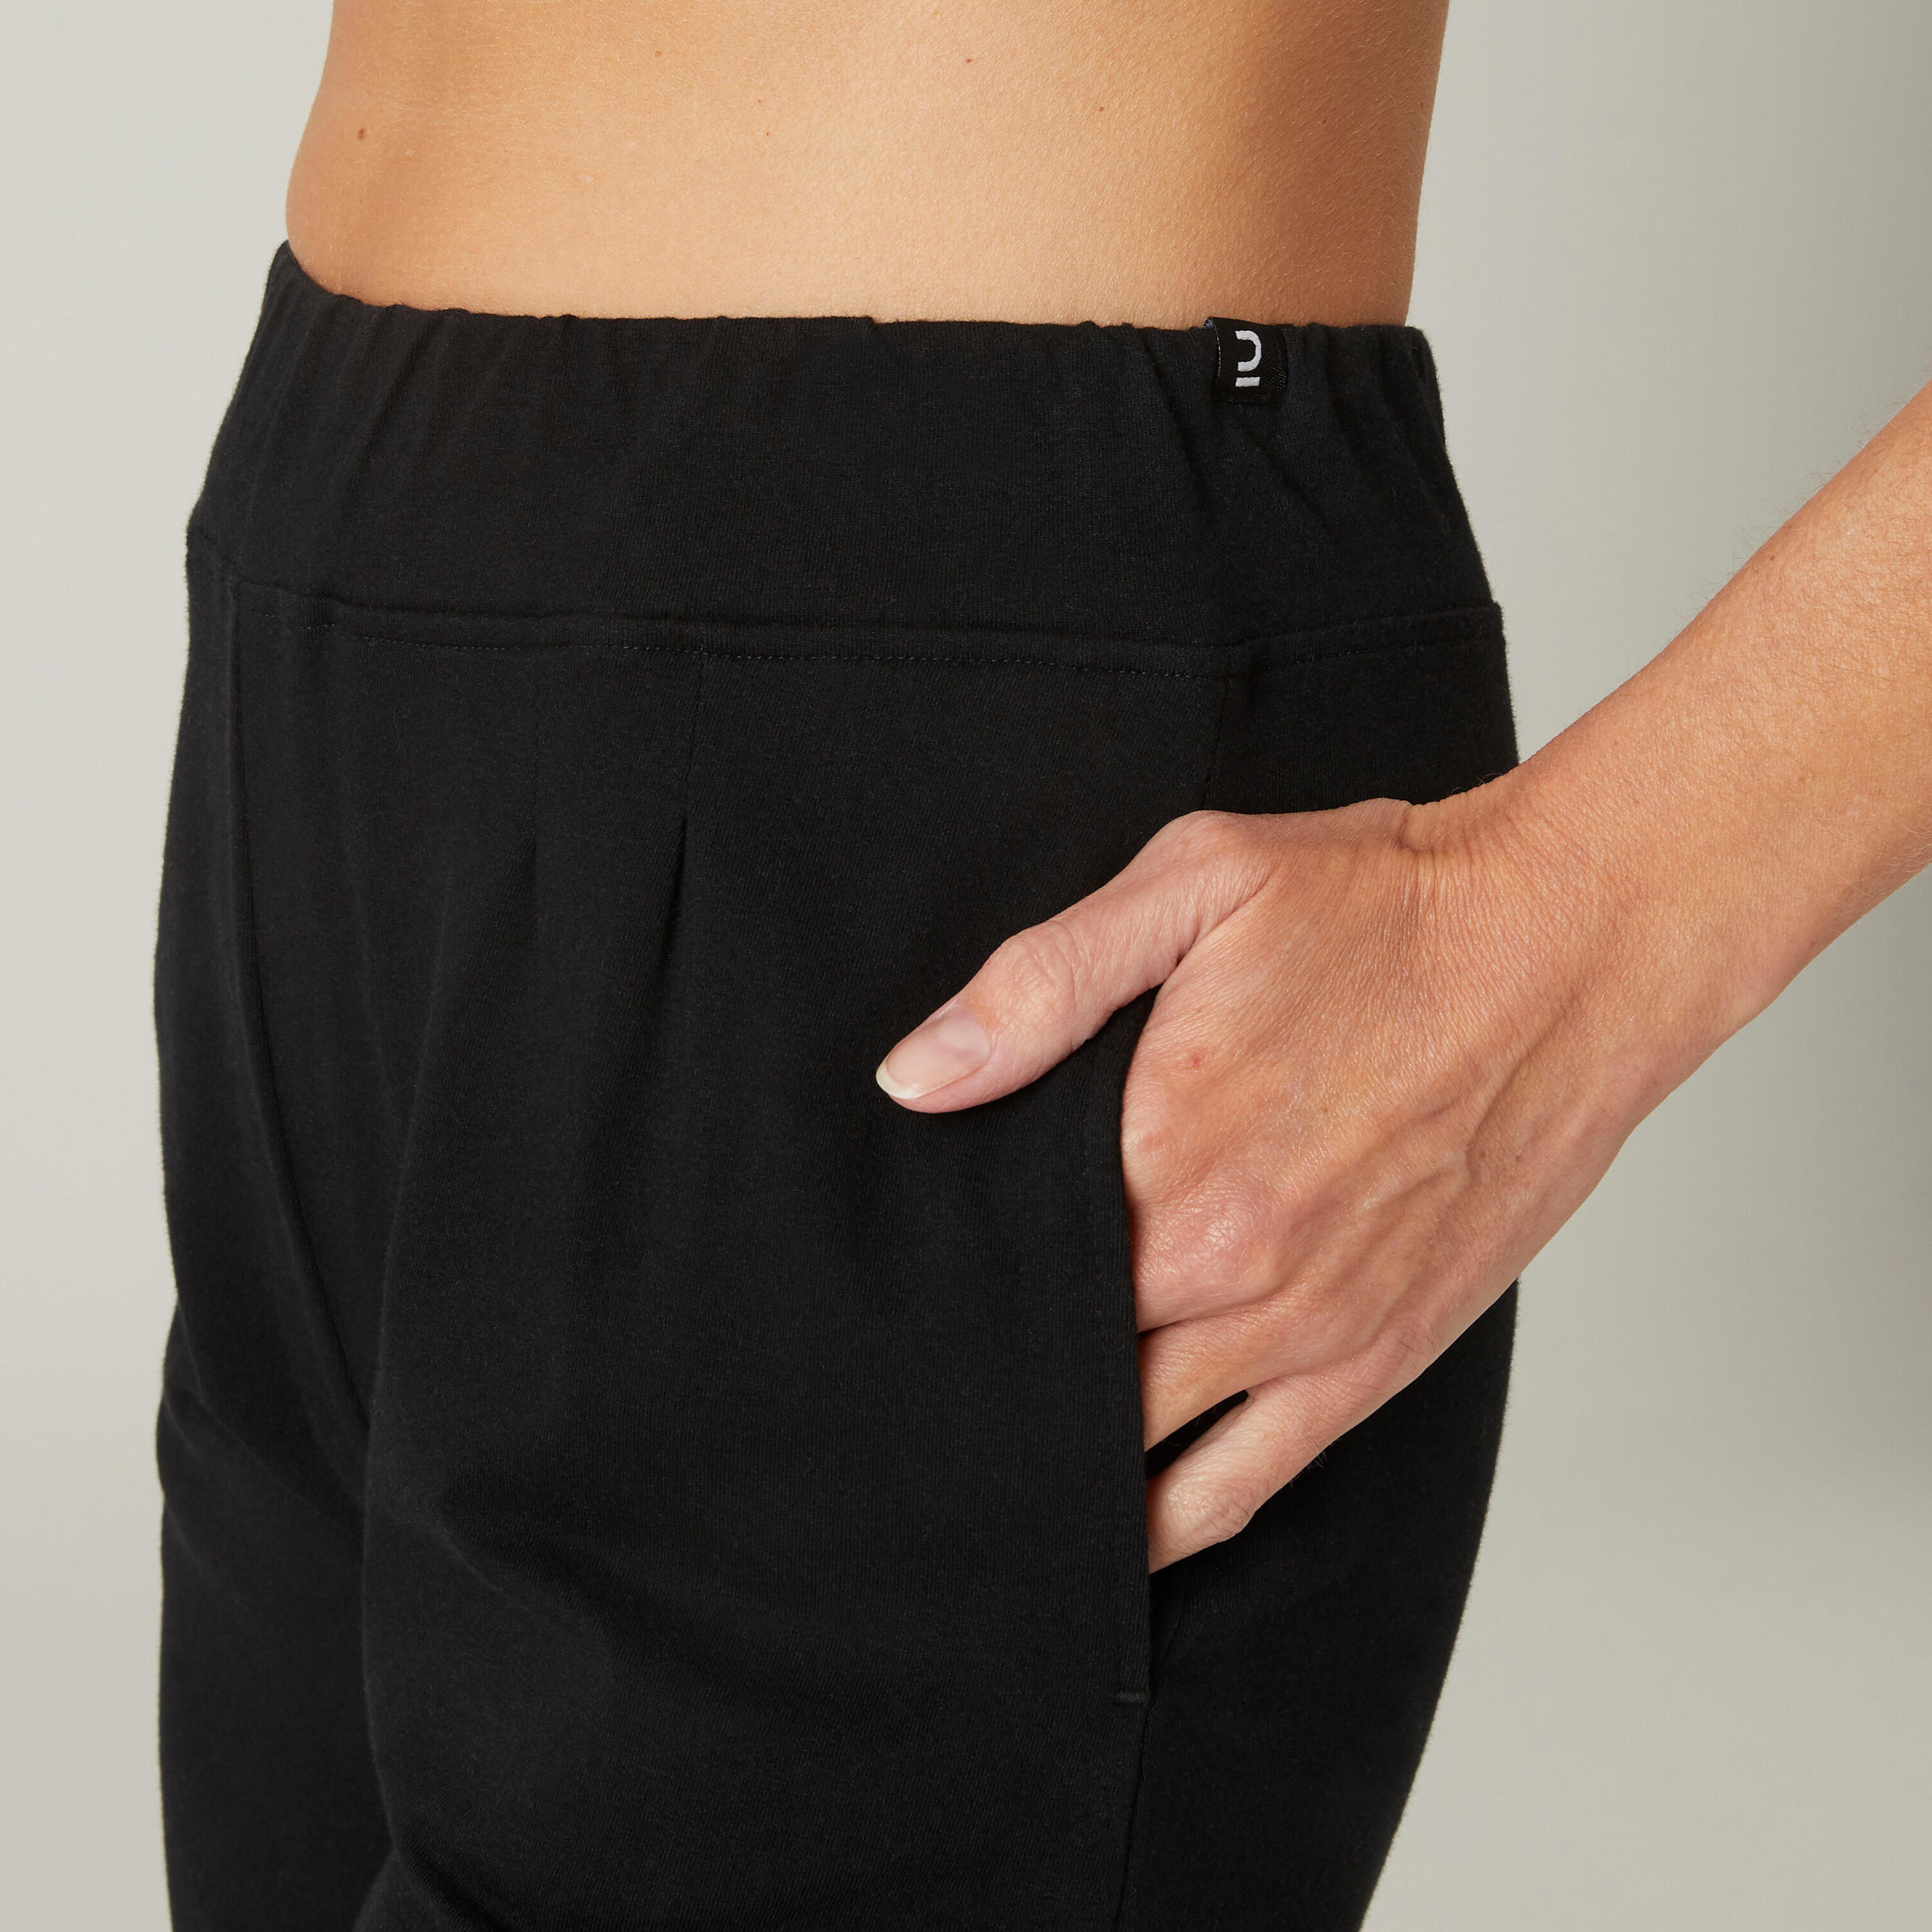 Women's Fitness Cropped Bottoms 500 with Pockets - Black 4/4